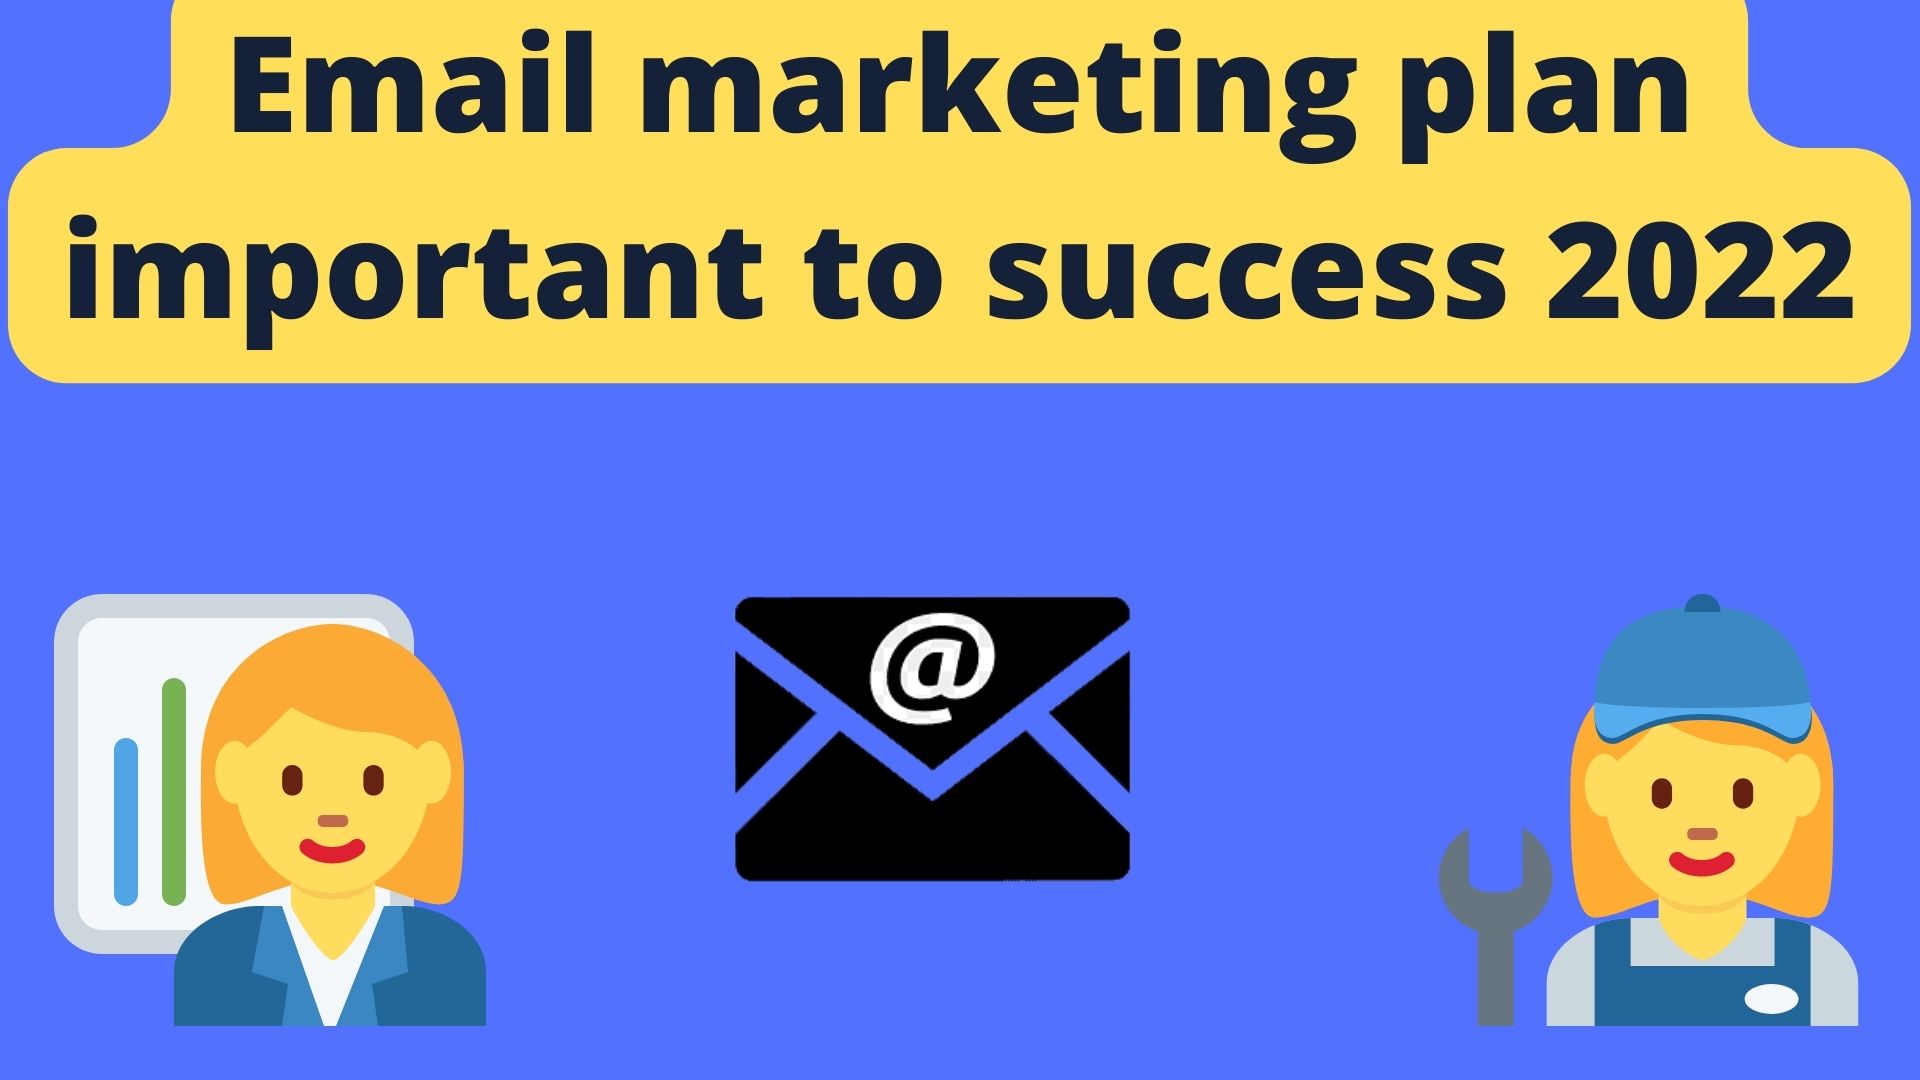 Email marketing plan important to success 2022